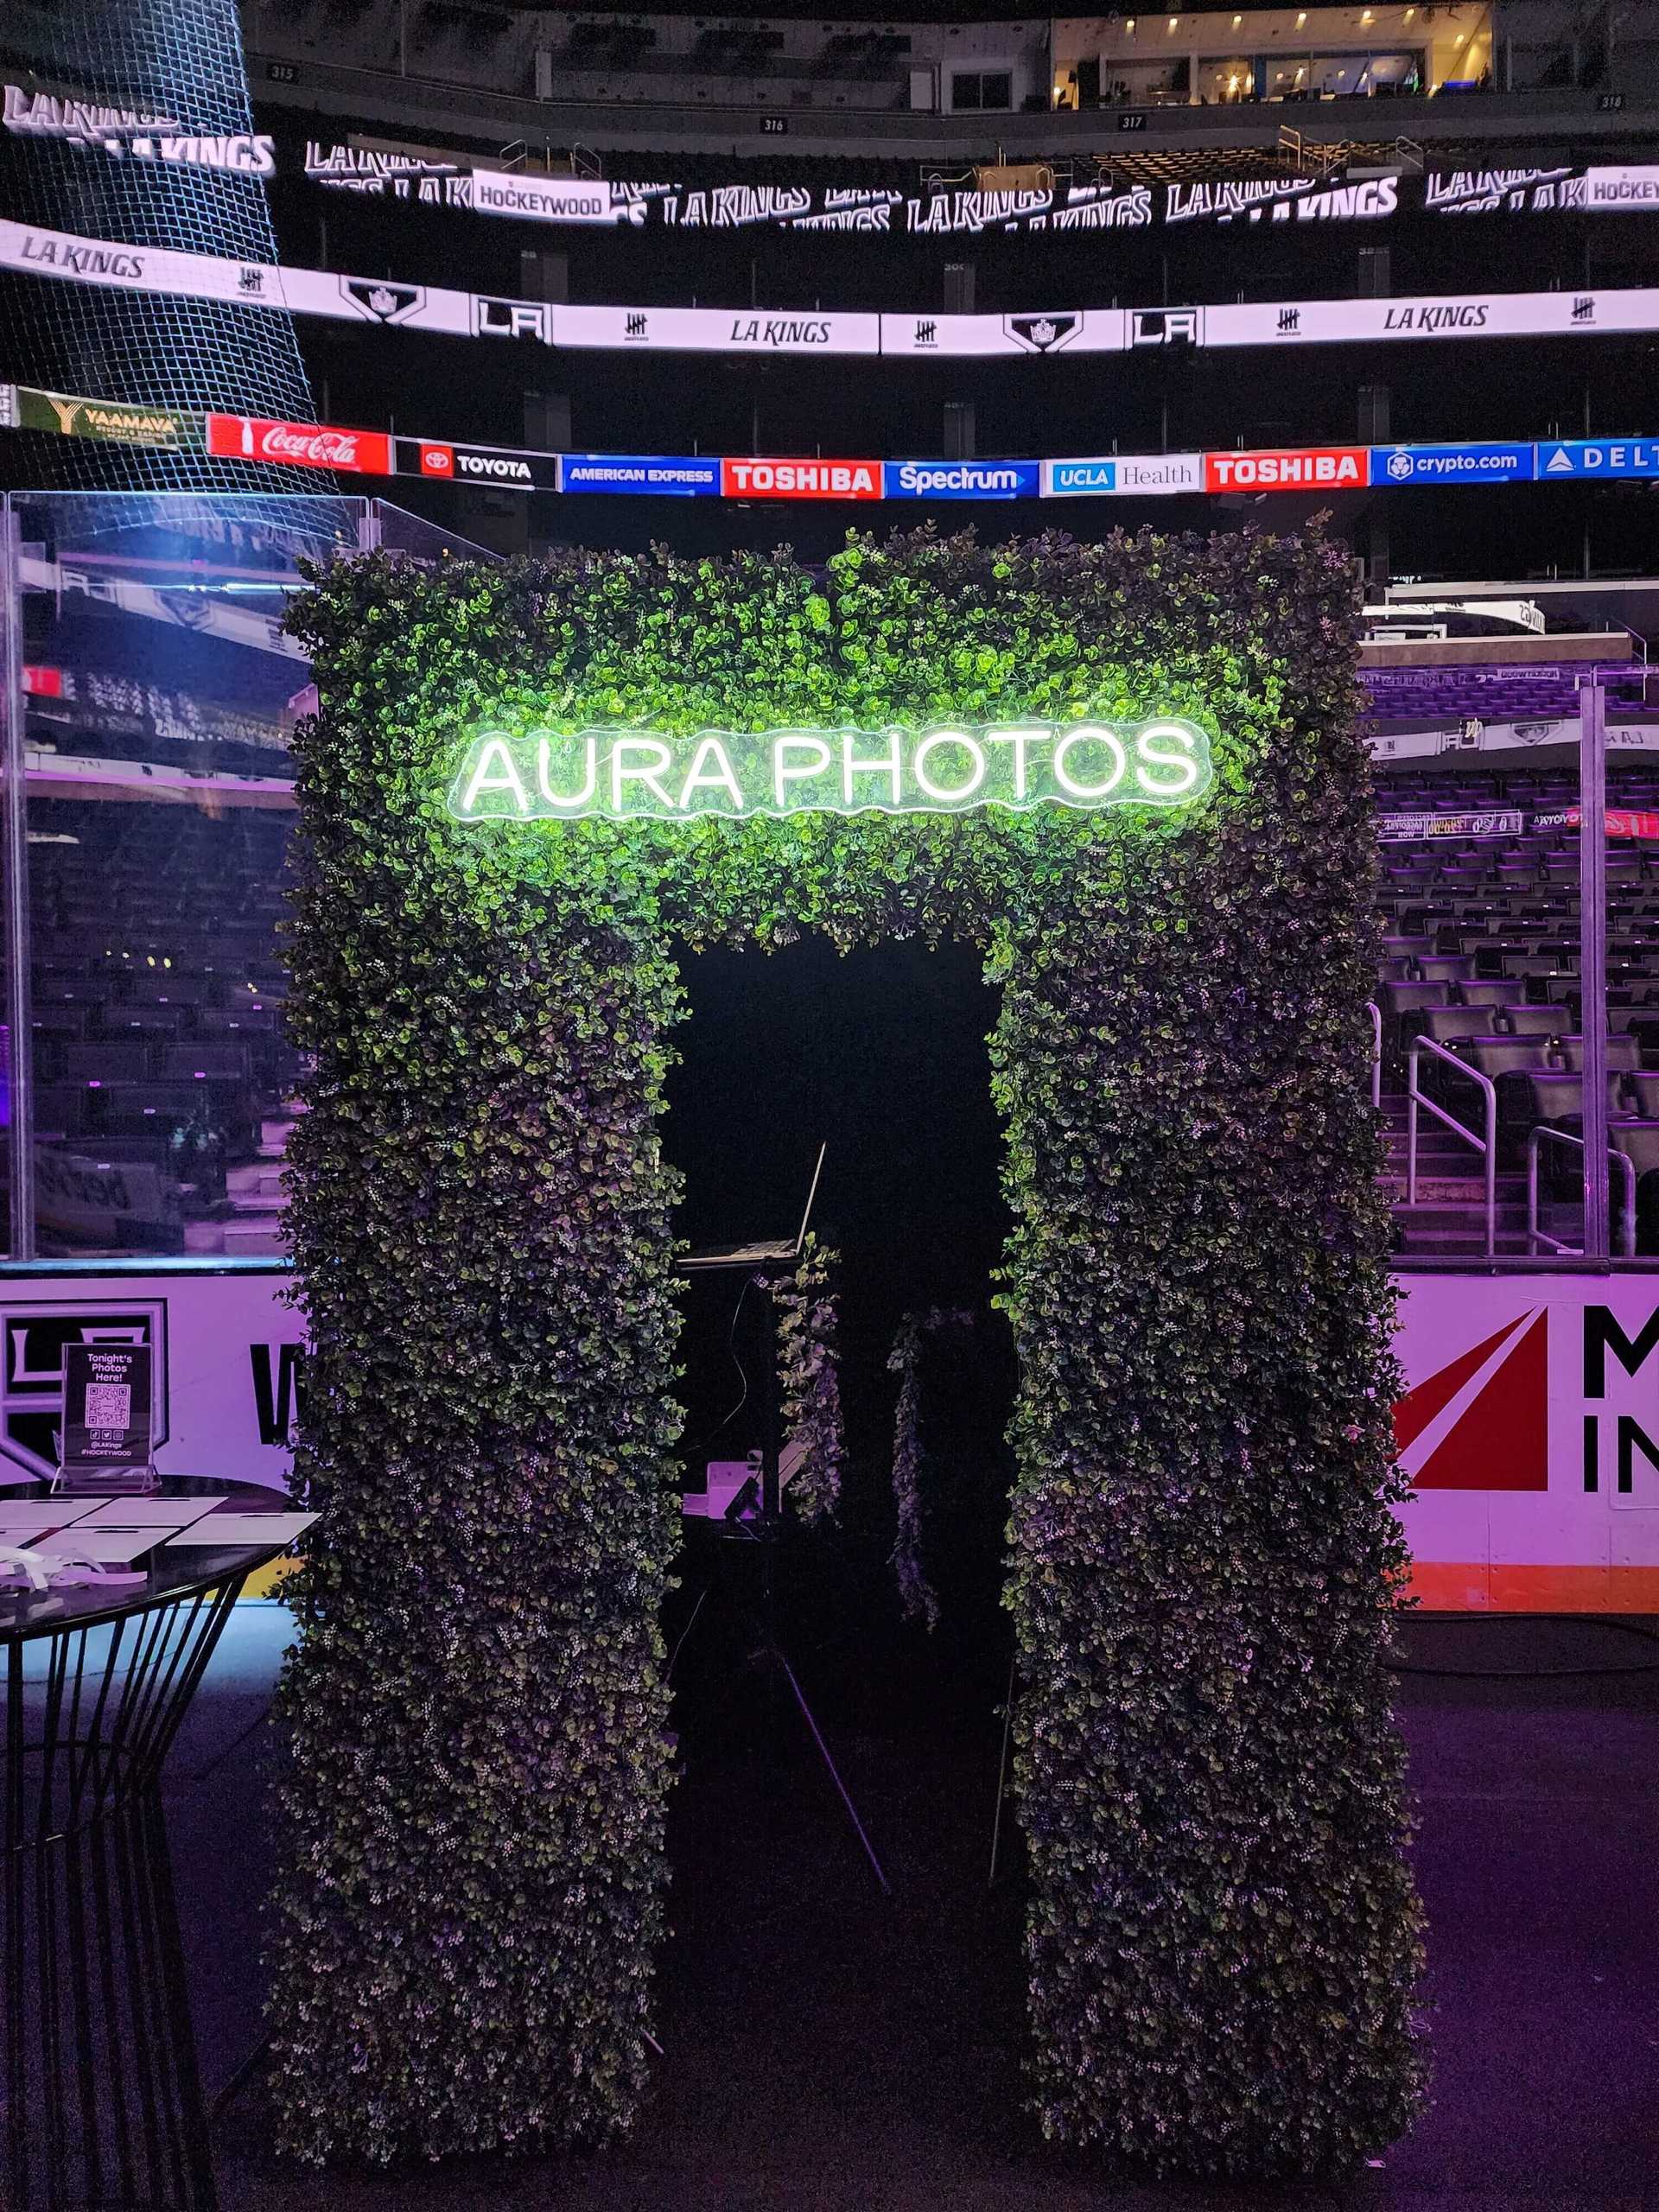 Aura Journey Photo Booth at LA Kings Game in Los Angeles, California